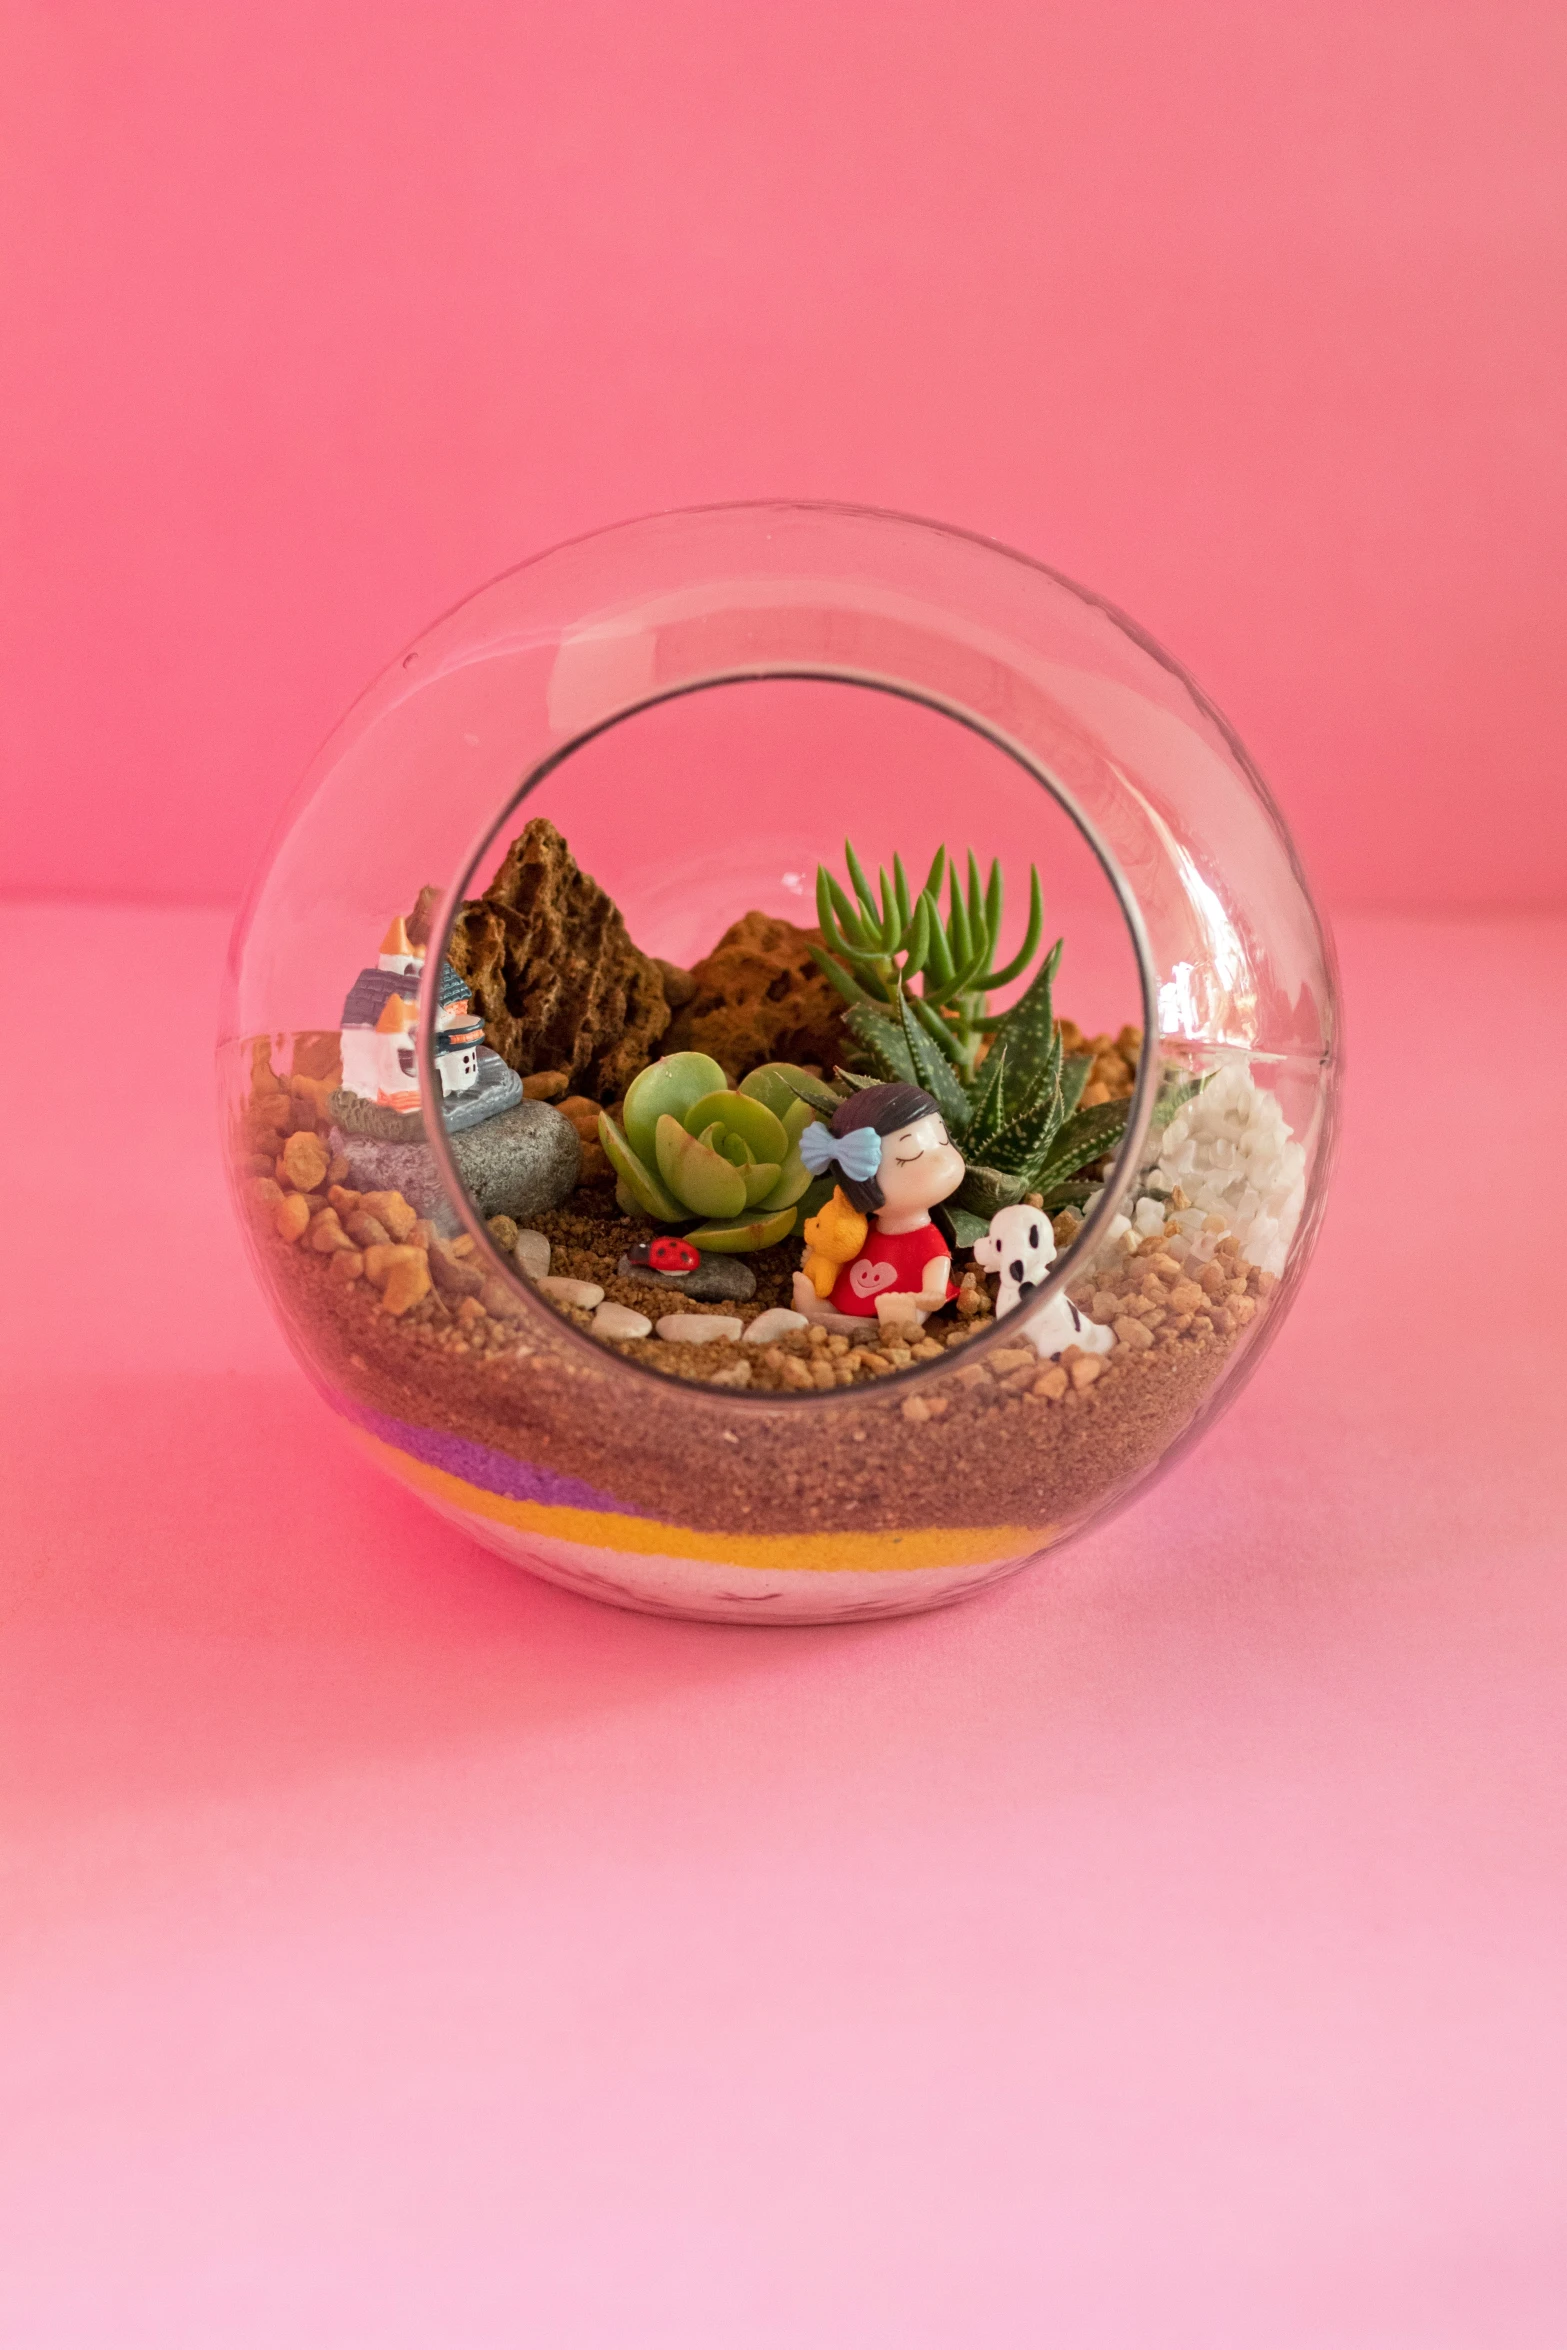 a terrarium with a cactus and other plants inside